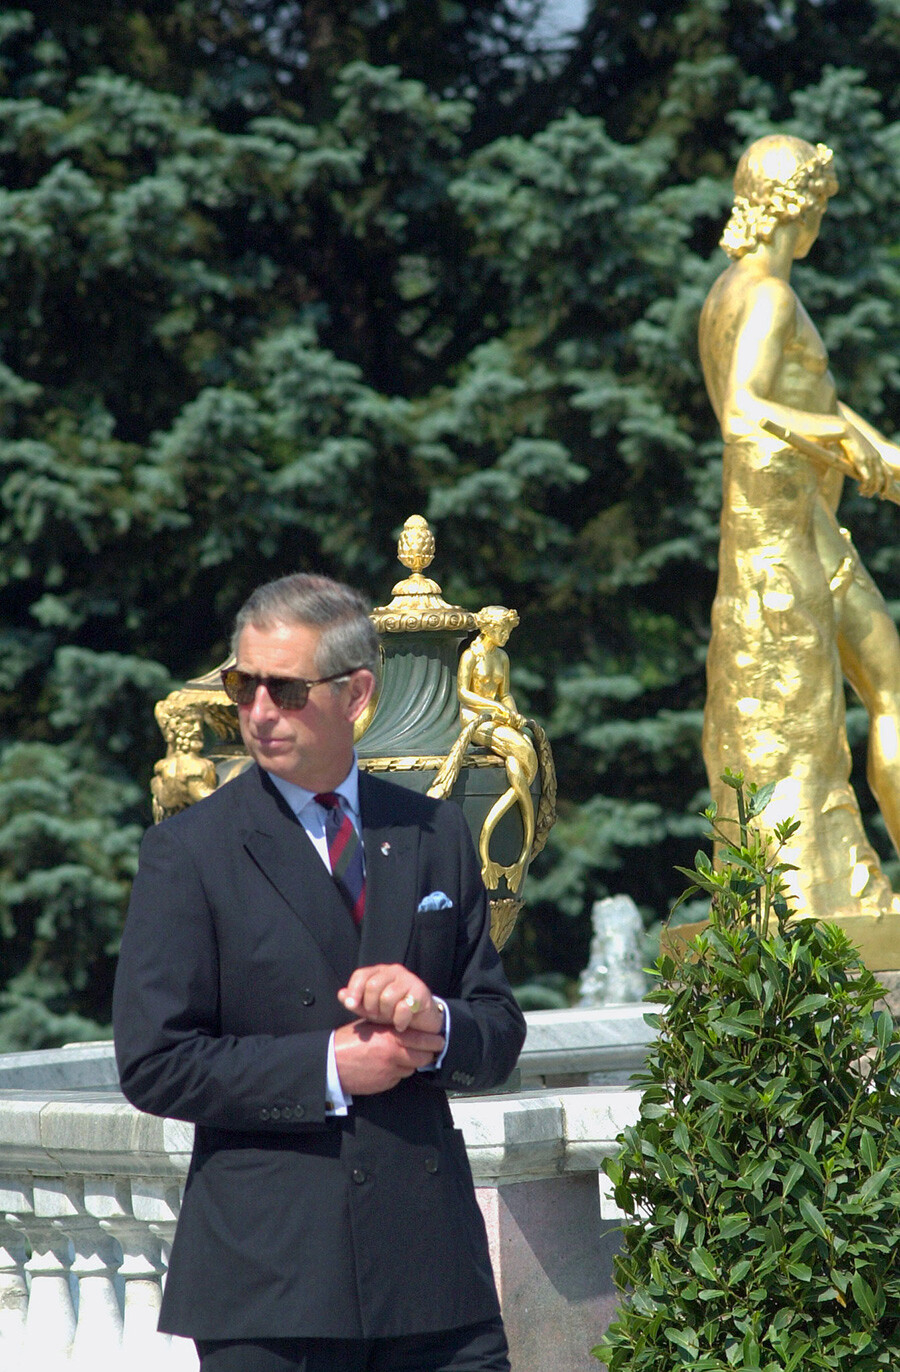 Prince Charles pictured visiting the tsar residence in Peterhof, 2003